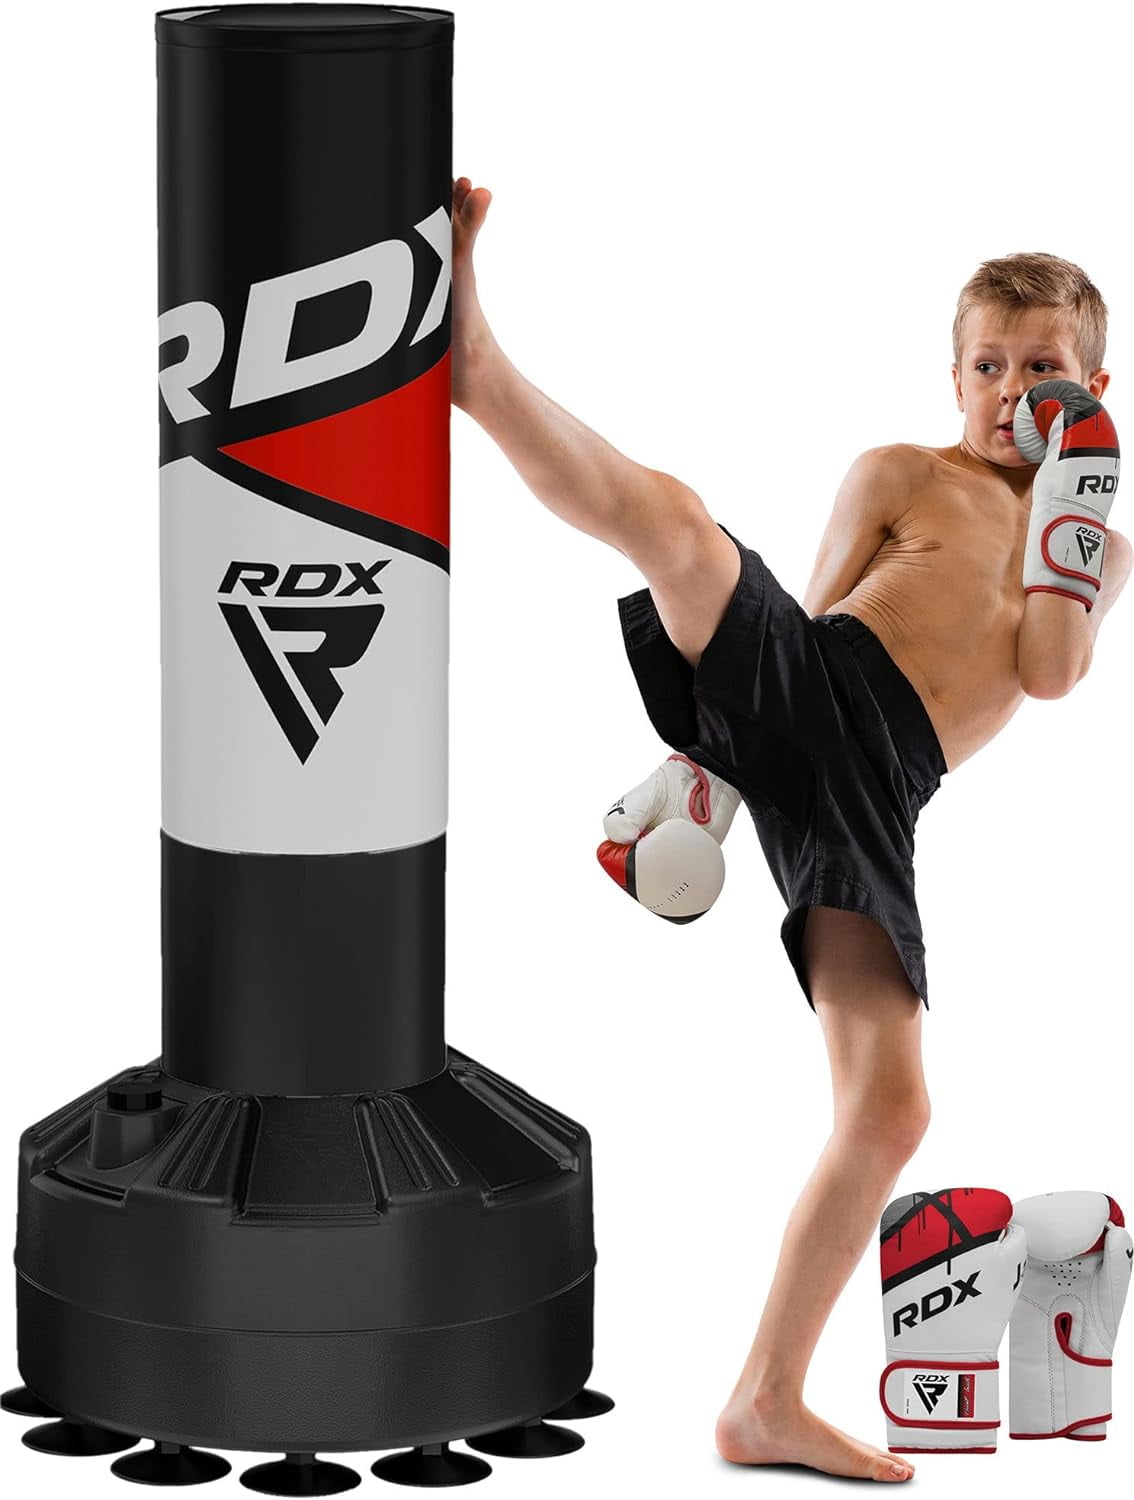 PROLAST Heavy Punching Bag 4 ft UNFILLED -Great for Boxing, MMA, Muay Thai  - Unfilled with Bottom D-Ring ( Black ) 